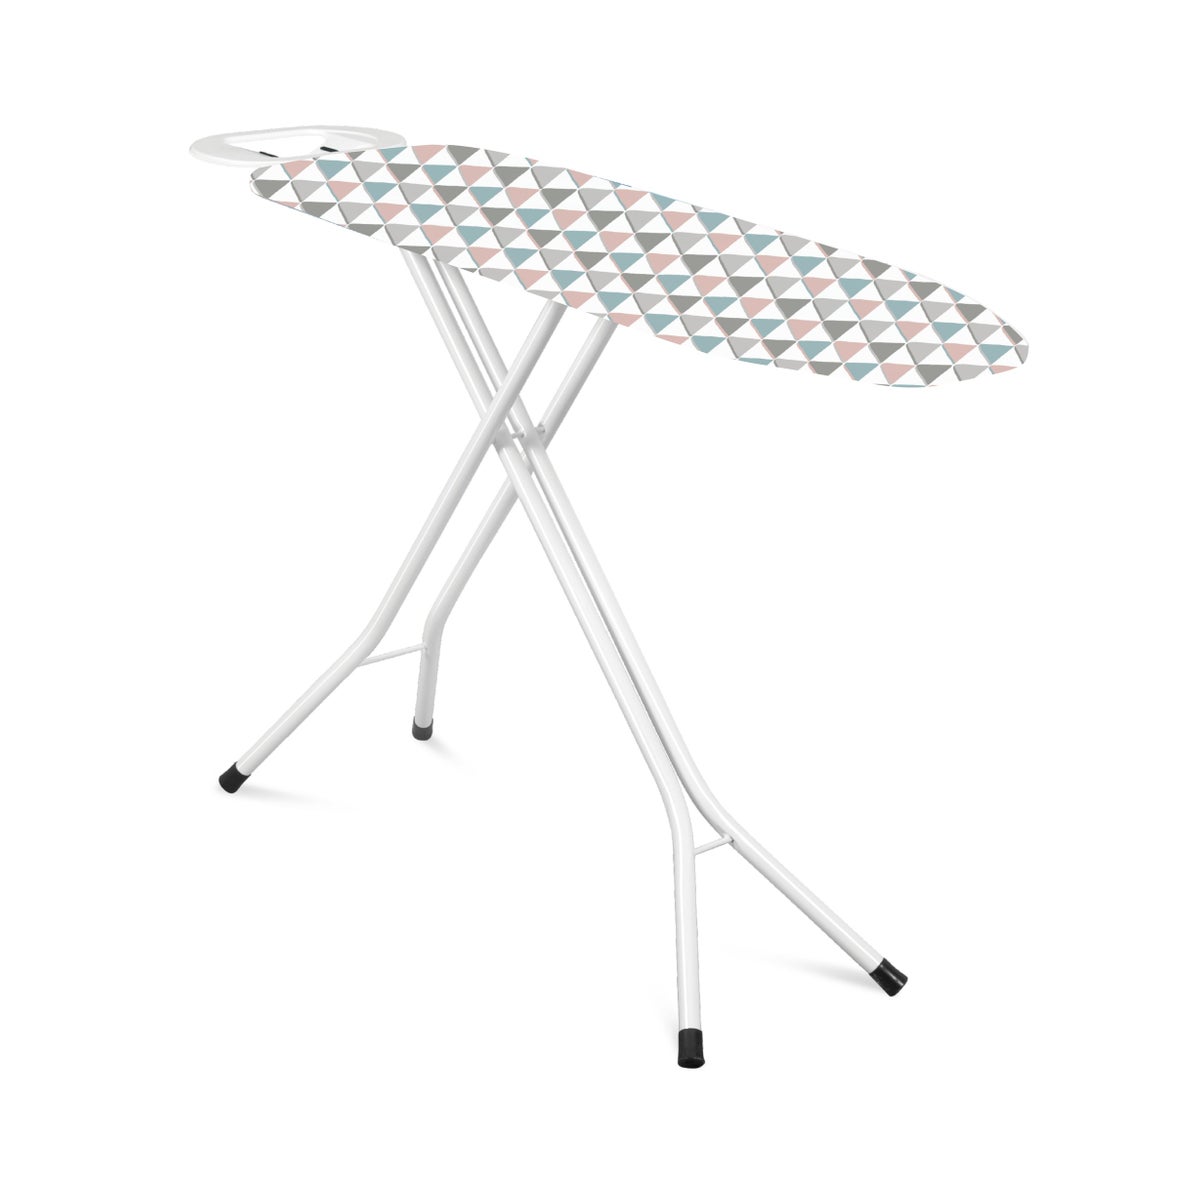 47" x 15" Metal Mesh Top Ironing Board with Metal Iron Rest (4)